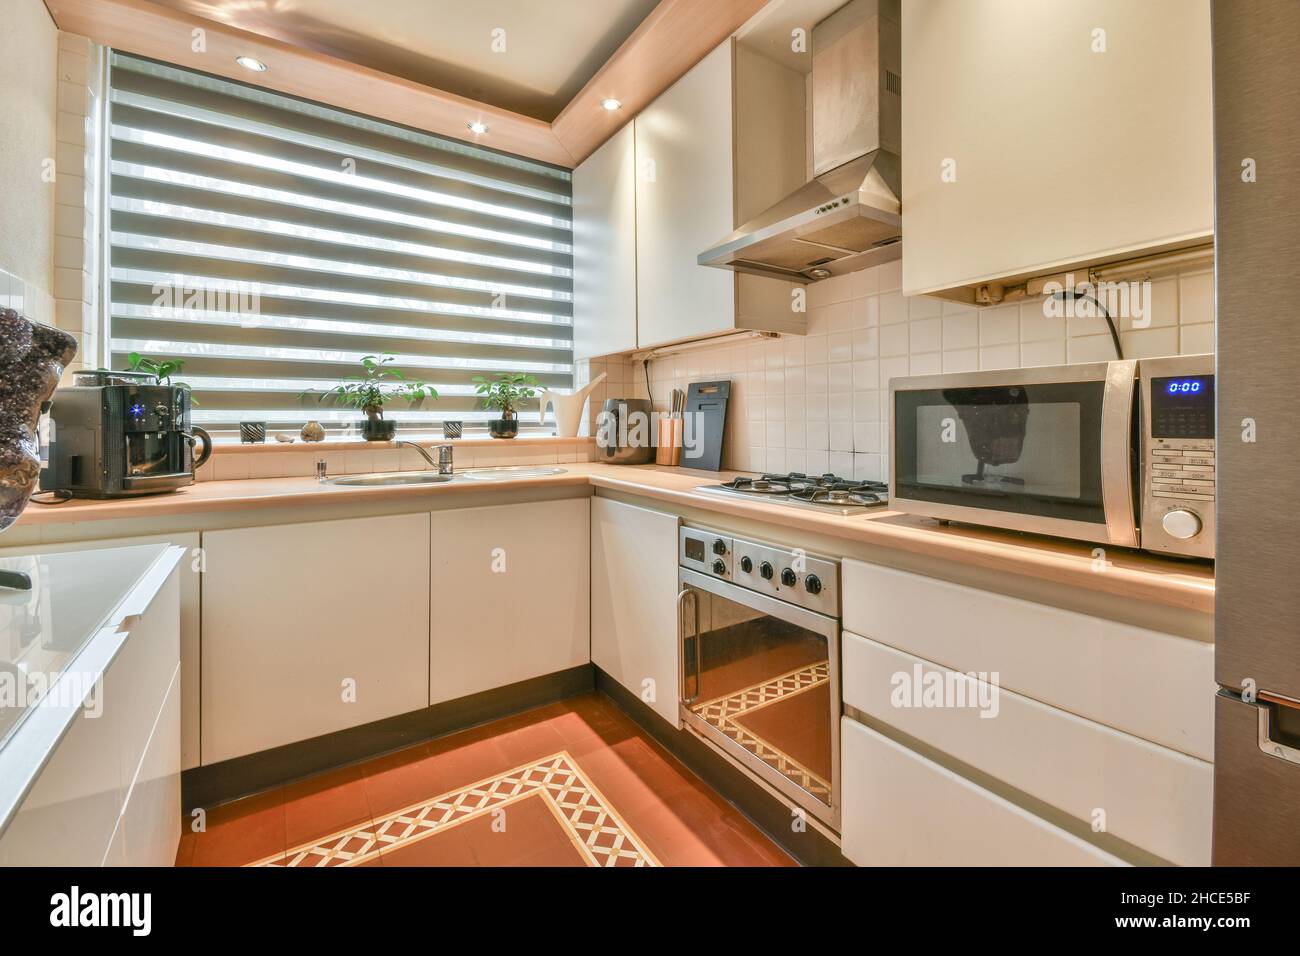 Interior of contemporary kitchen with cabinets and counter opposite fridge and stove with range hood Stock Photo